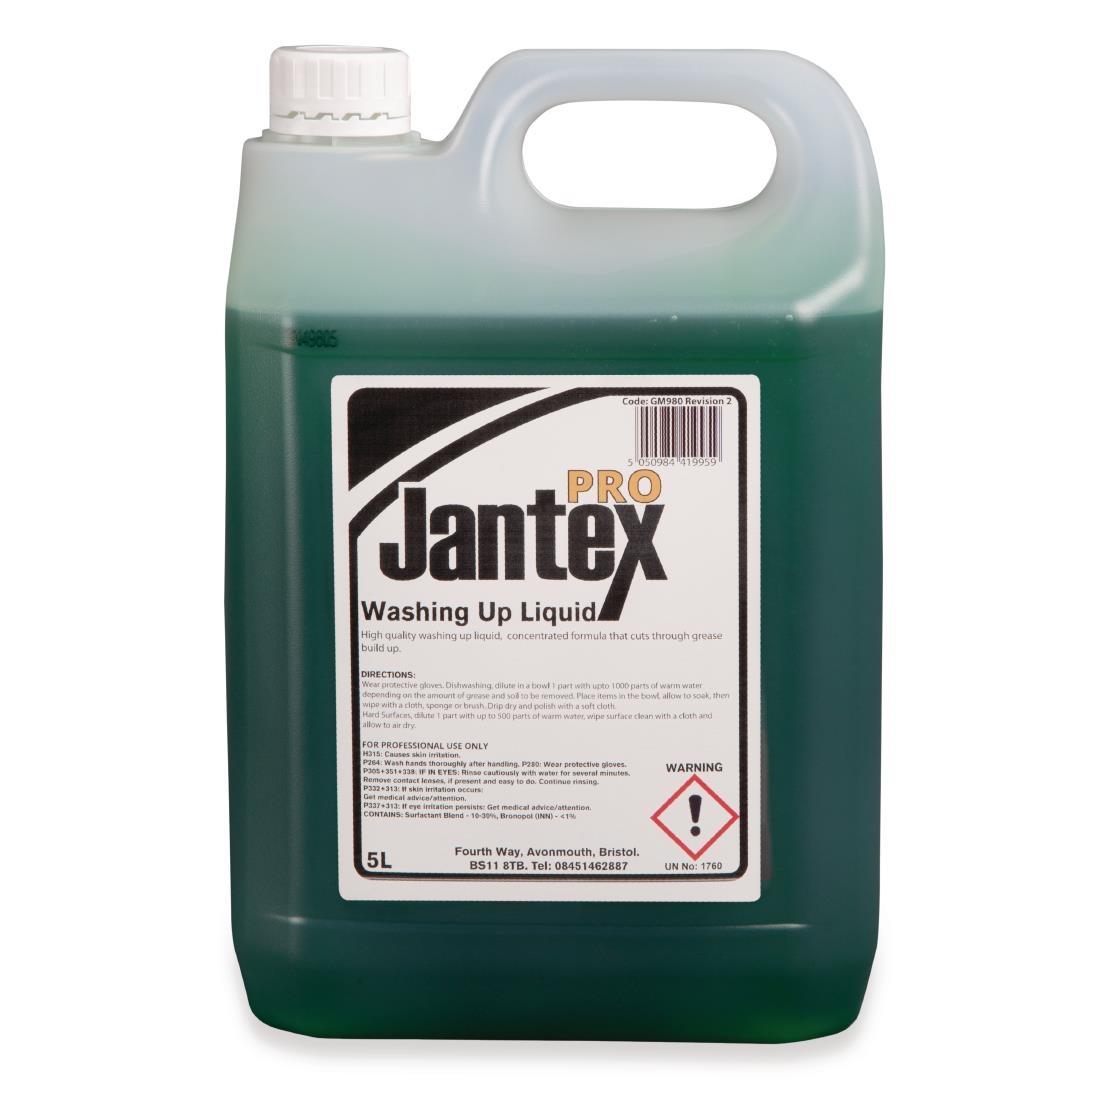 Jantex Pro Washing Up Liquid Concentrate 5Ltr - GM980  - 1